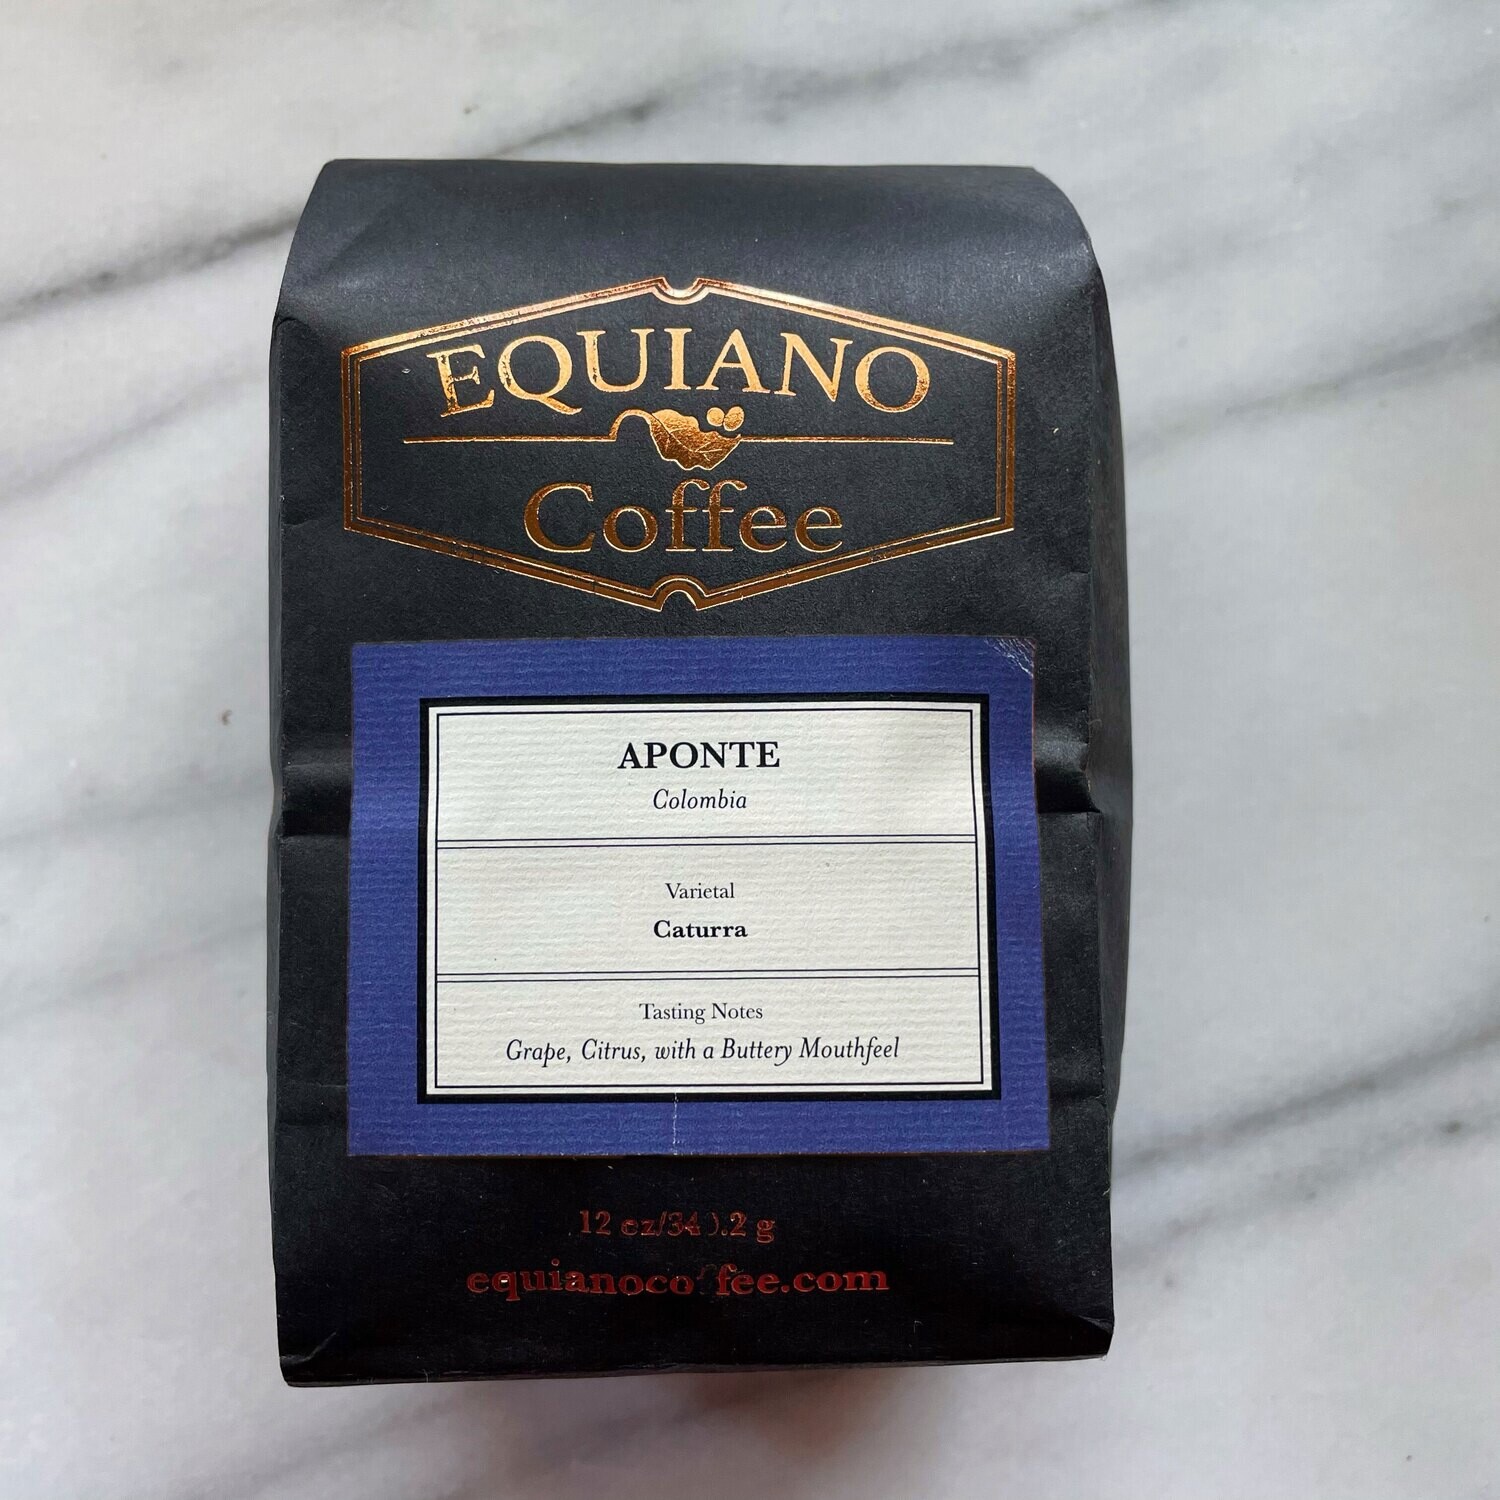 Colombia Aponte